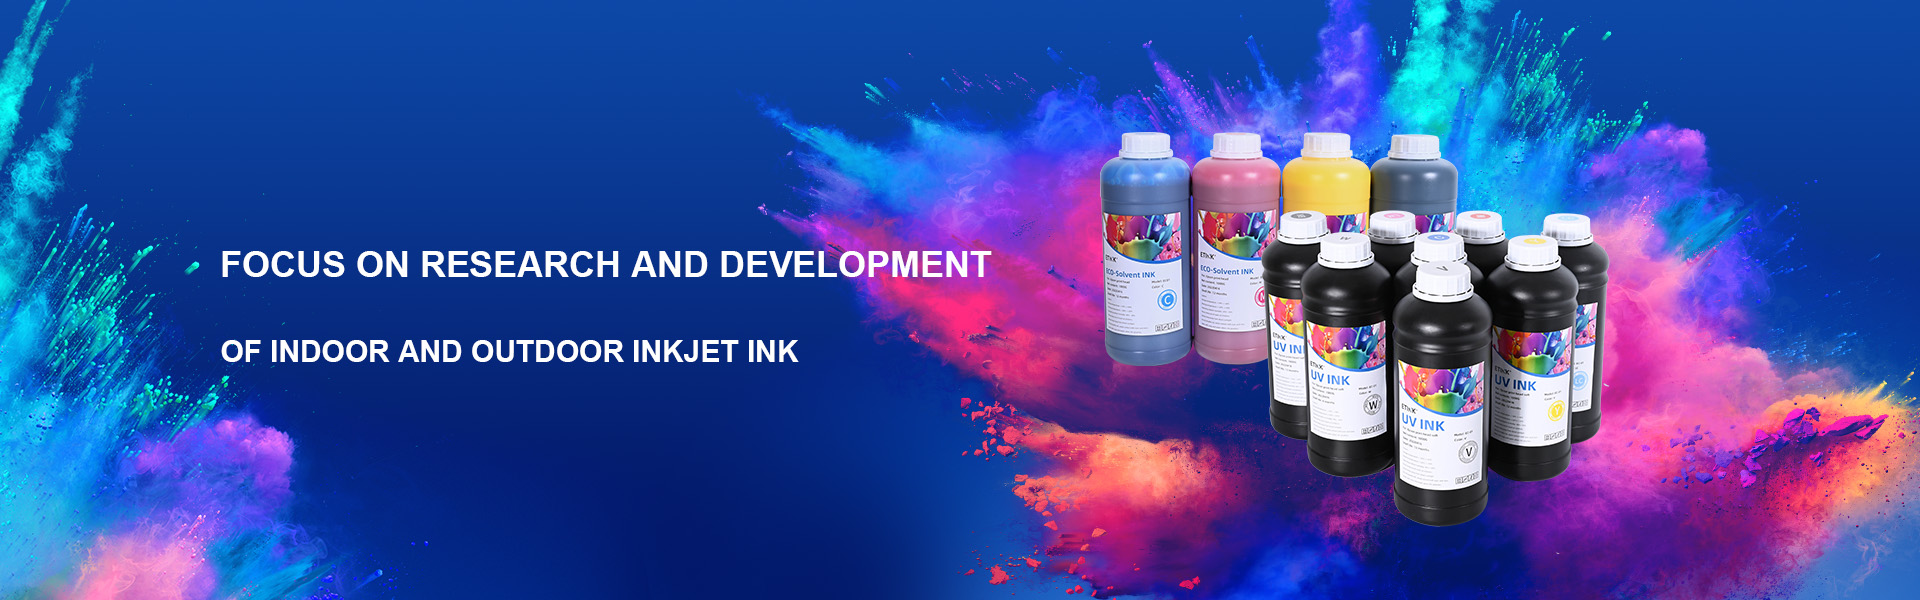 DongGuanYitian Inkjet consumables company limited